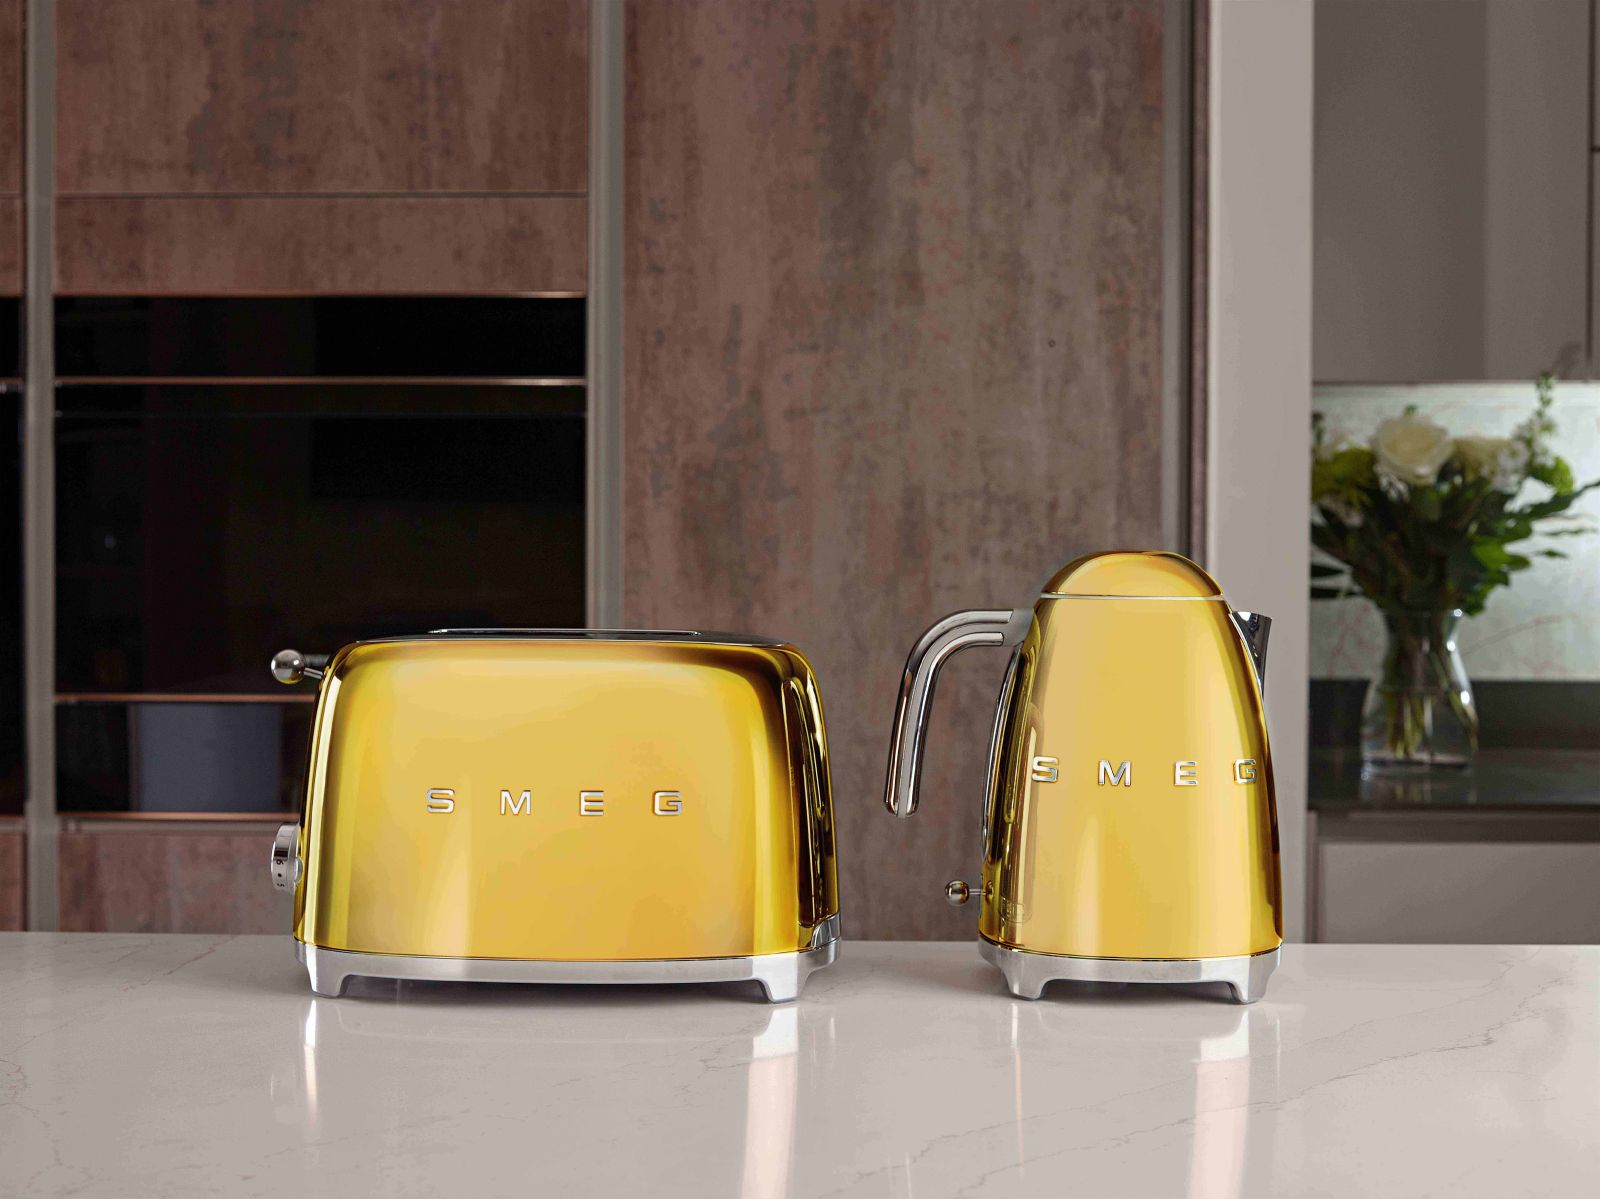 Gold Smeg Kettle and Toaster in a Masterclass Kitchen